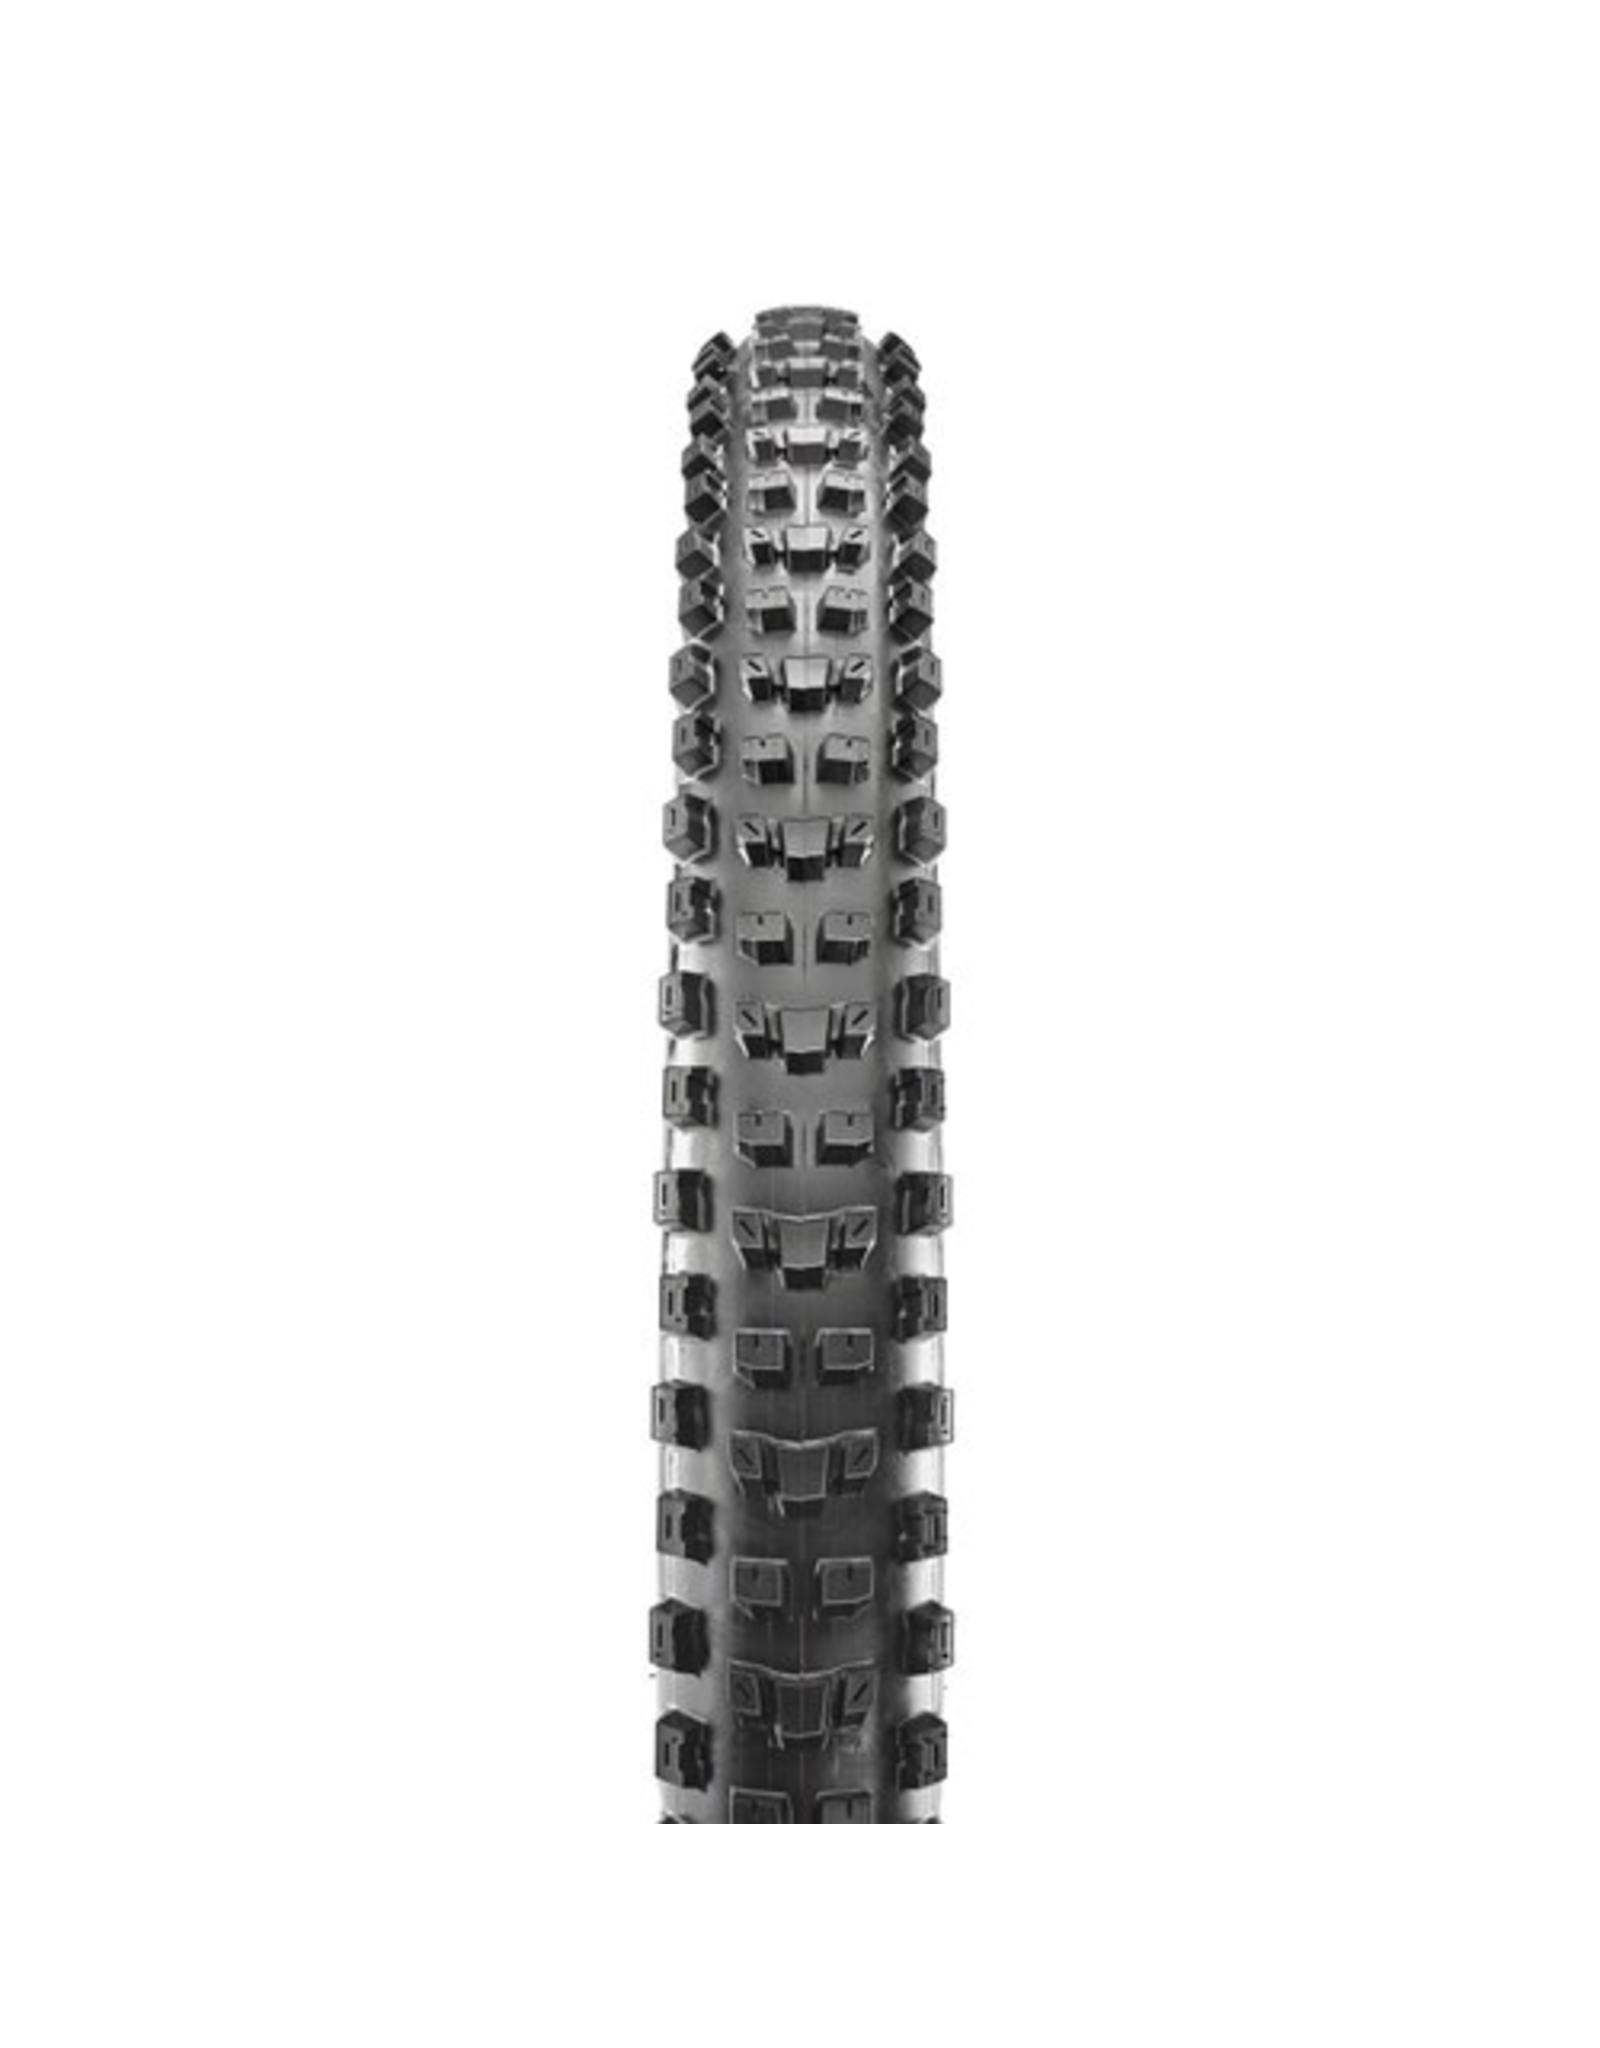 MAXXIS MAXXIS DISSECTOR 27.5 X 2.40” TR EXO FOLD 60TPI TYRE